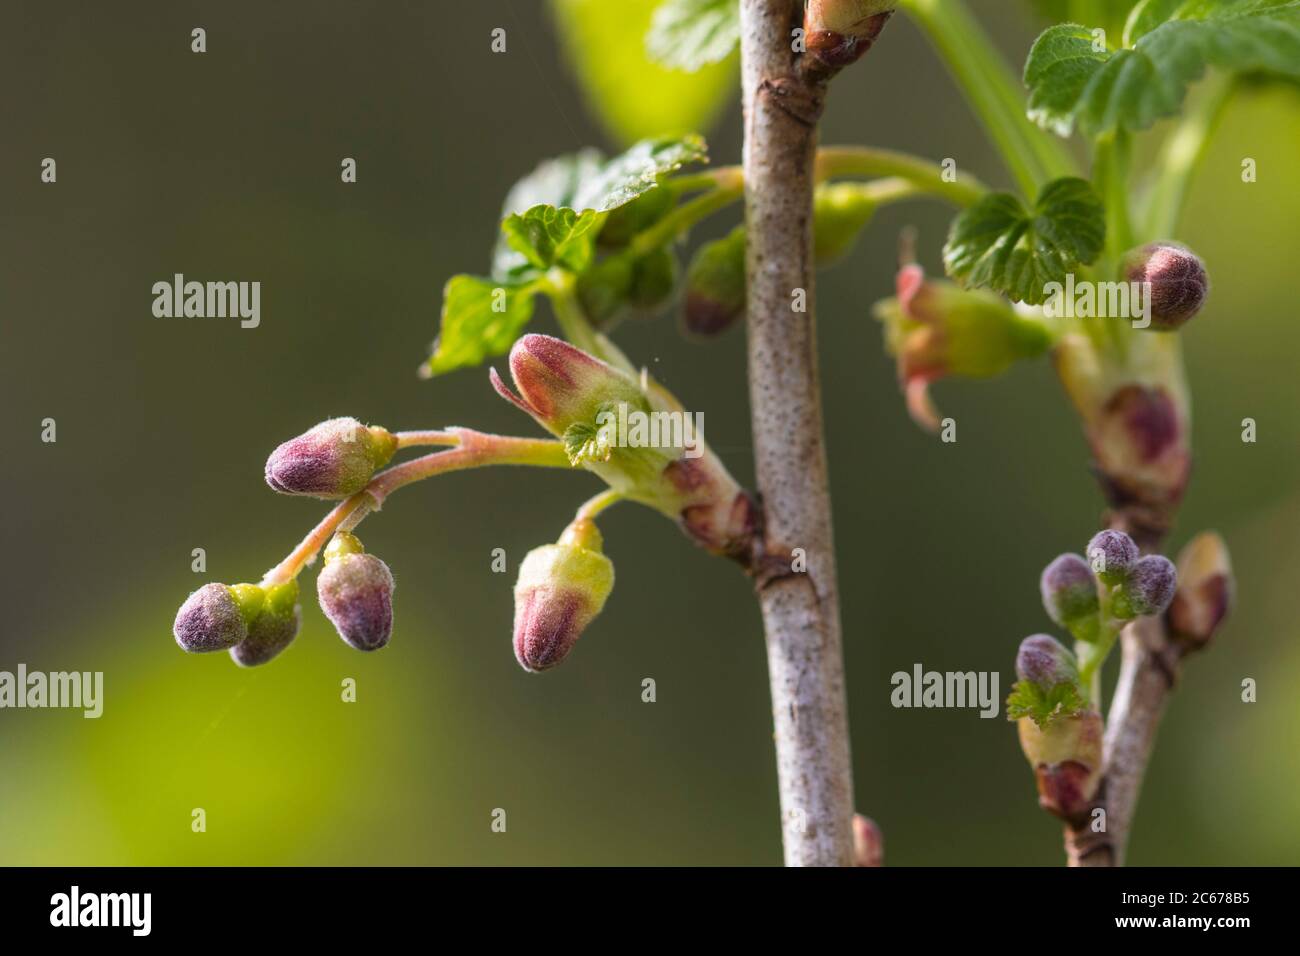 Black Currant flower buds Stock Photo